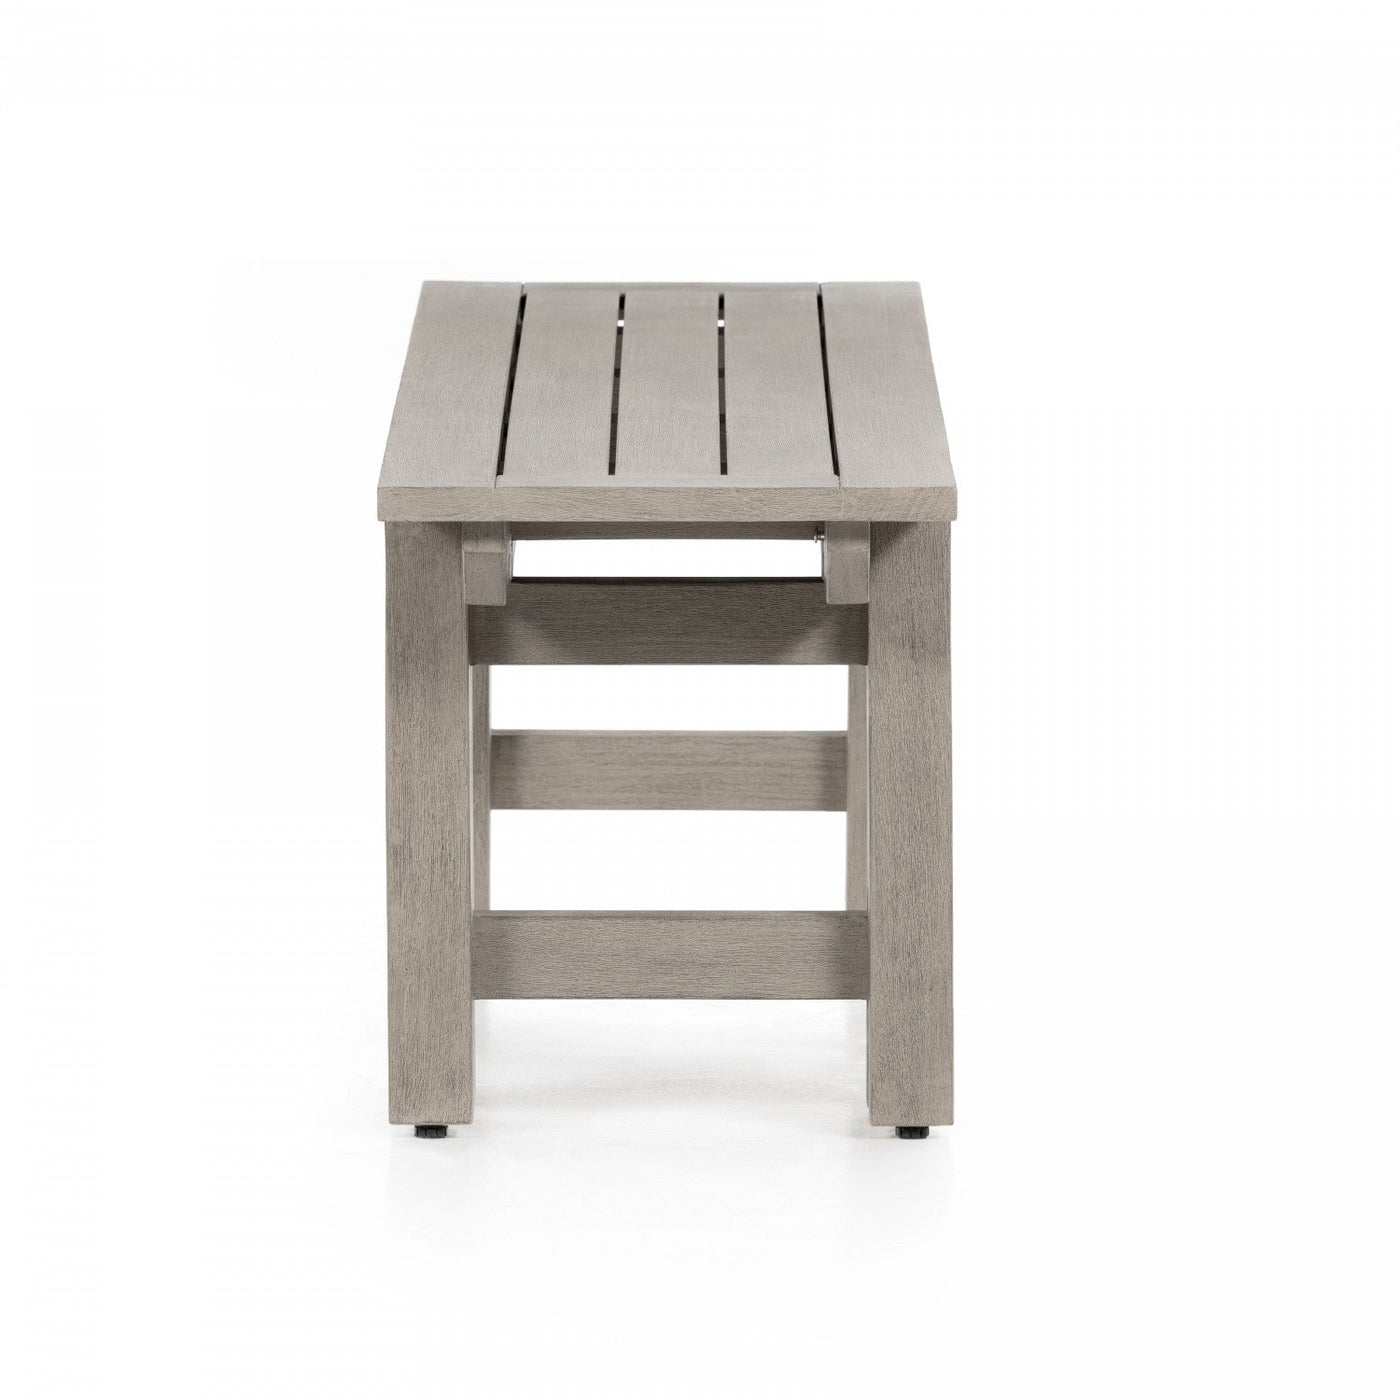 BALFOUR OUTDOOR DINING BENCH,WEATHERED GRE